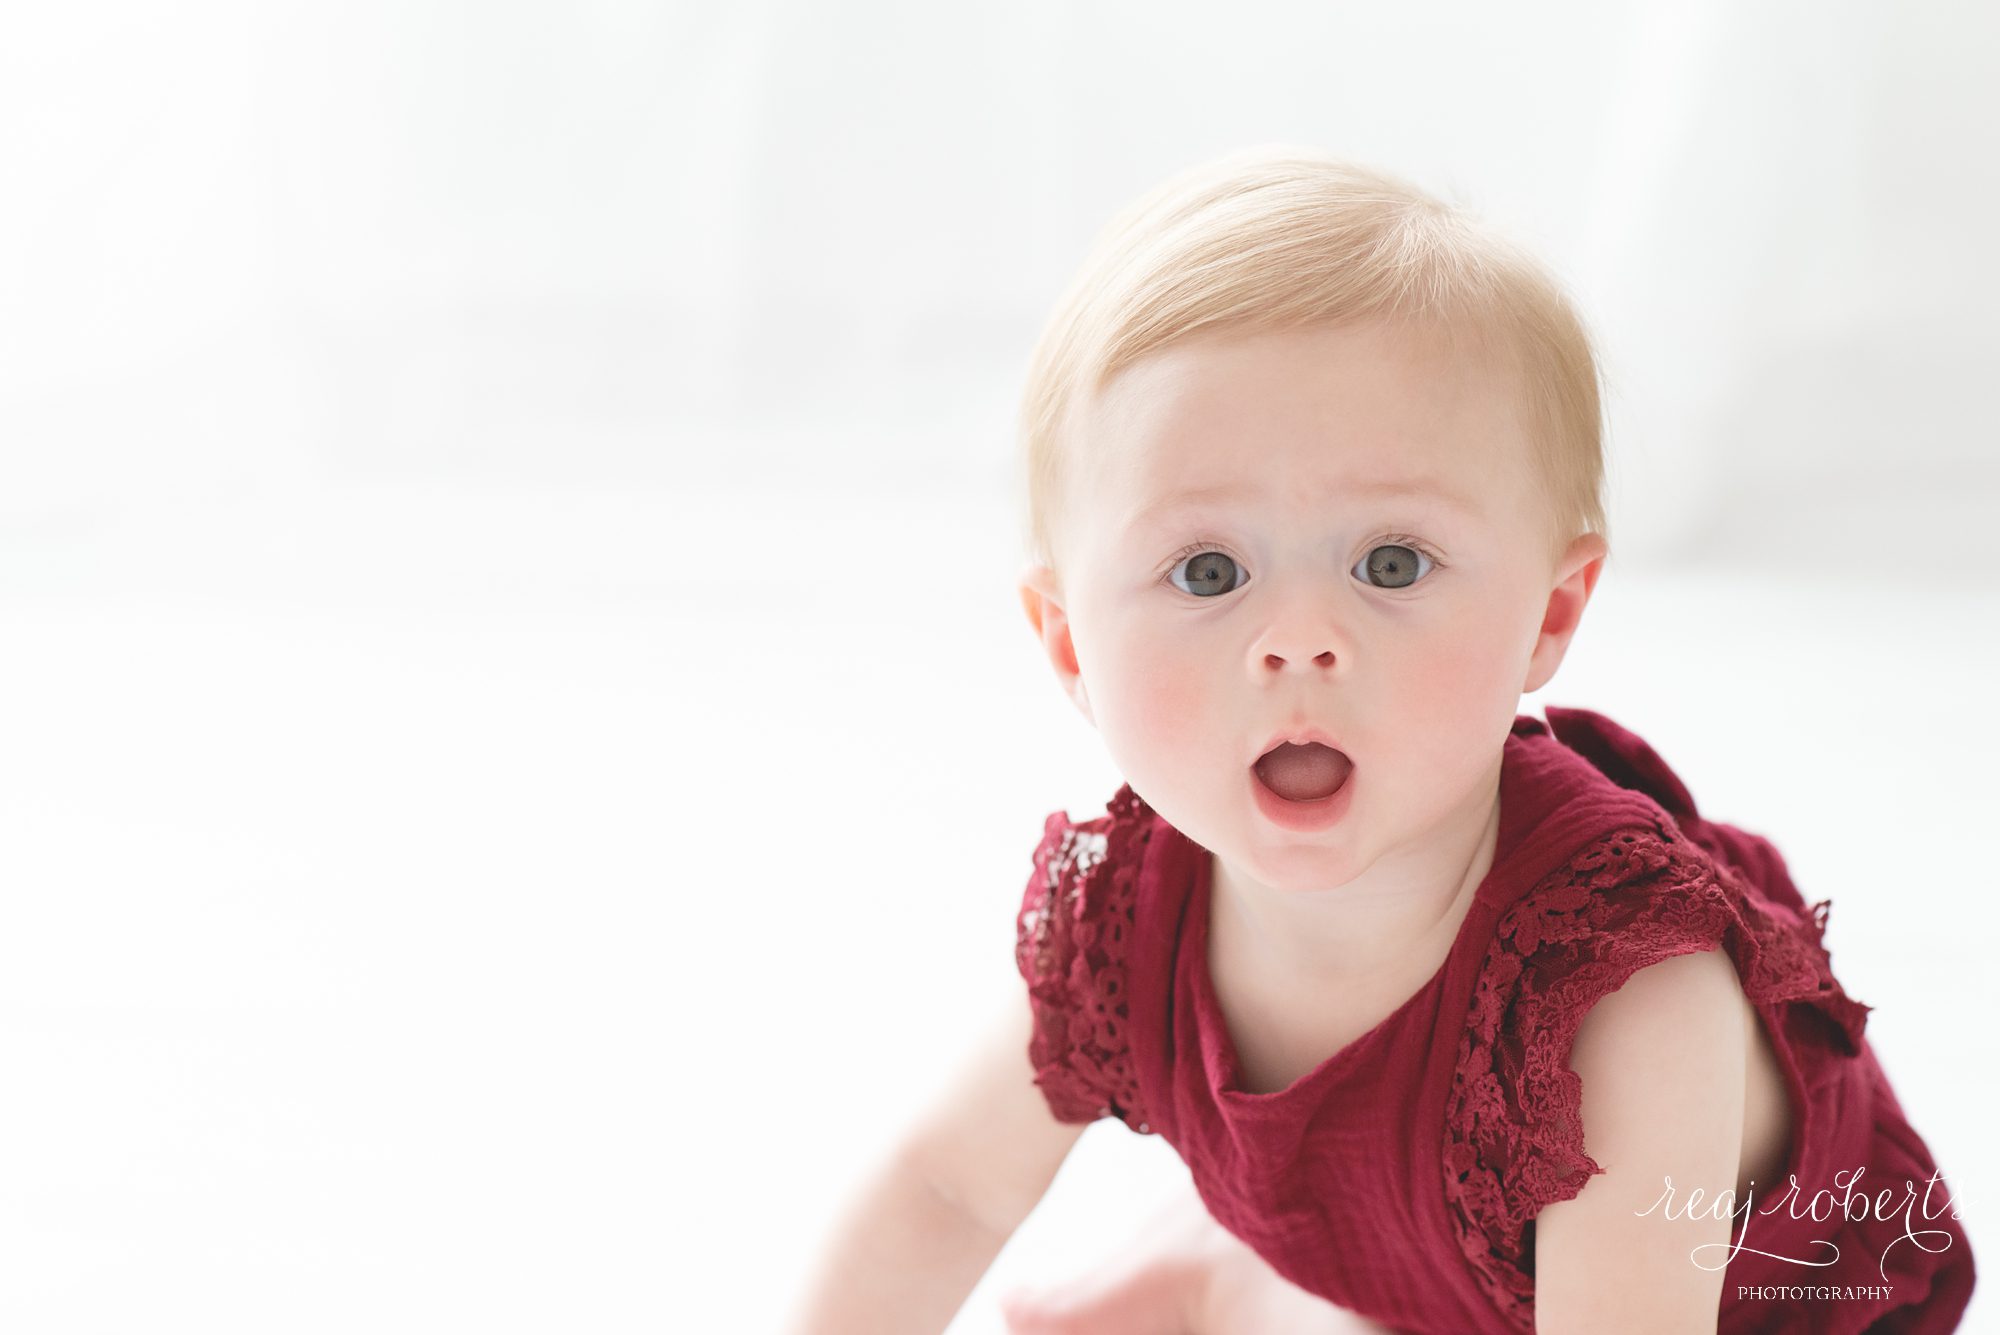 6 month baby photo sitter session | Reaj Roberts Photography